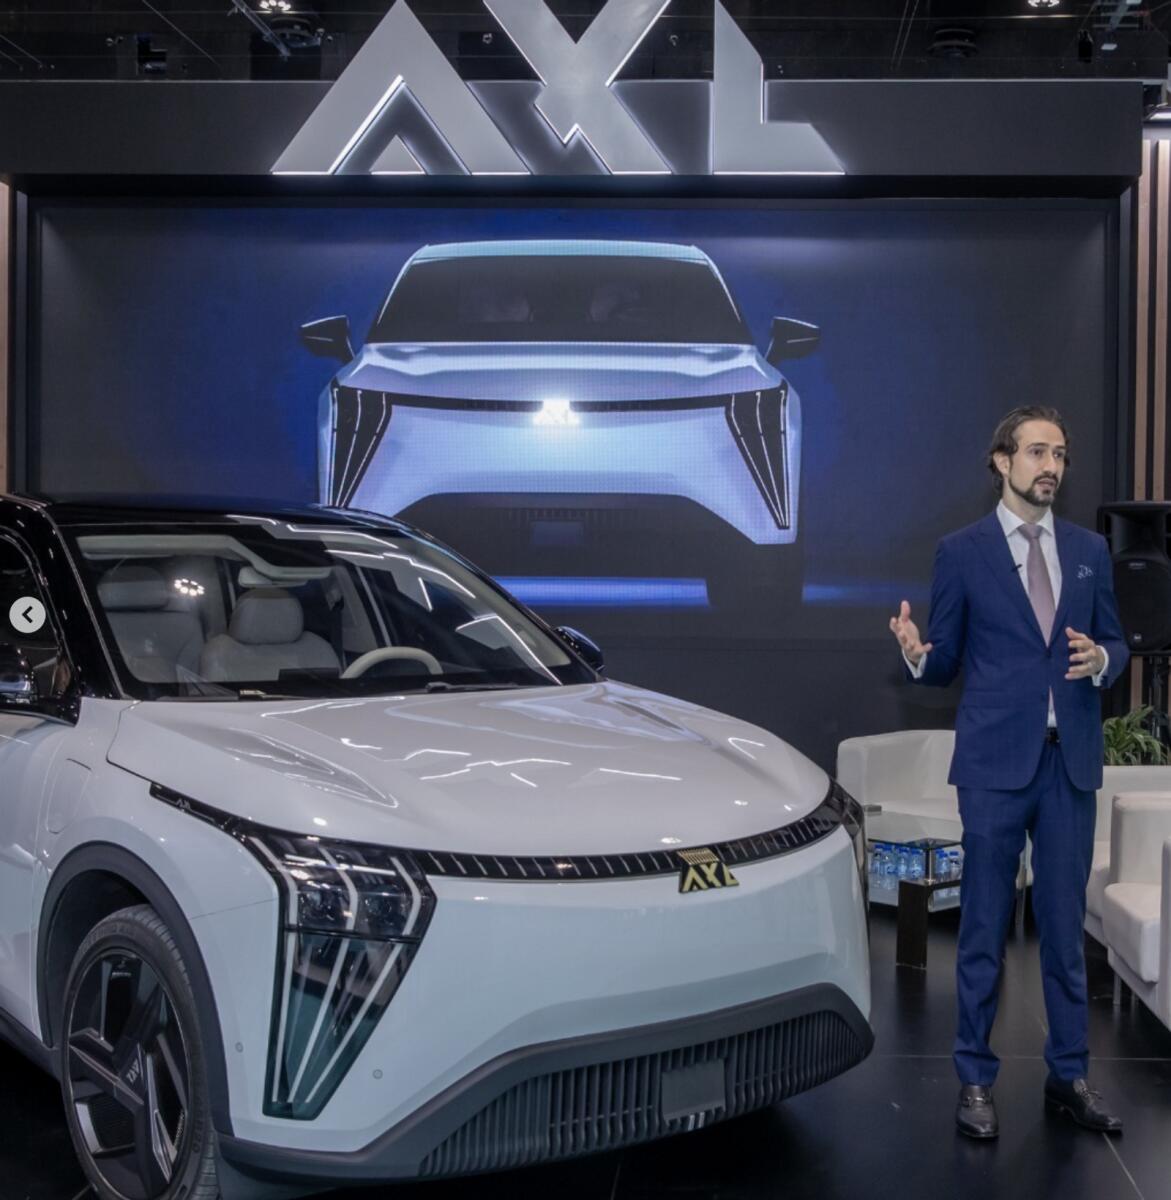 UAE Electric carmaker AXL plans assembly unit in Emirates, create